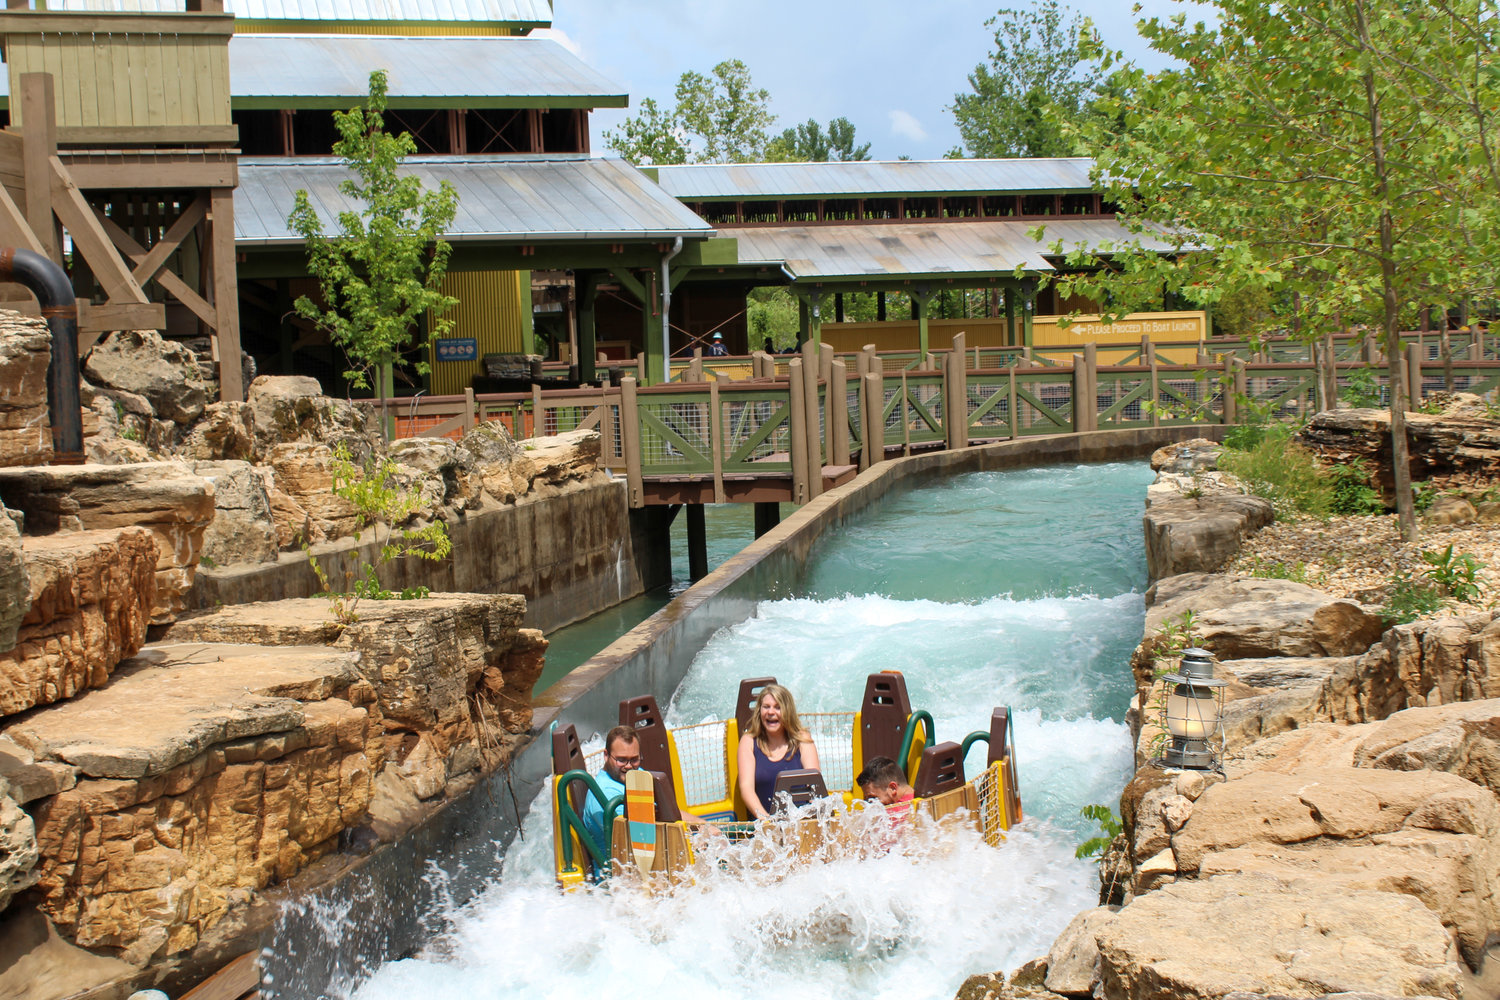 The $23 million Mystic River Falls is Silver Dollar City's newest ride, opening last month.